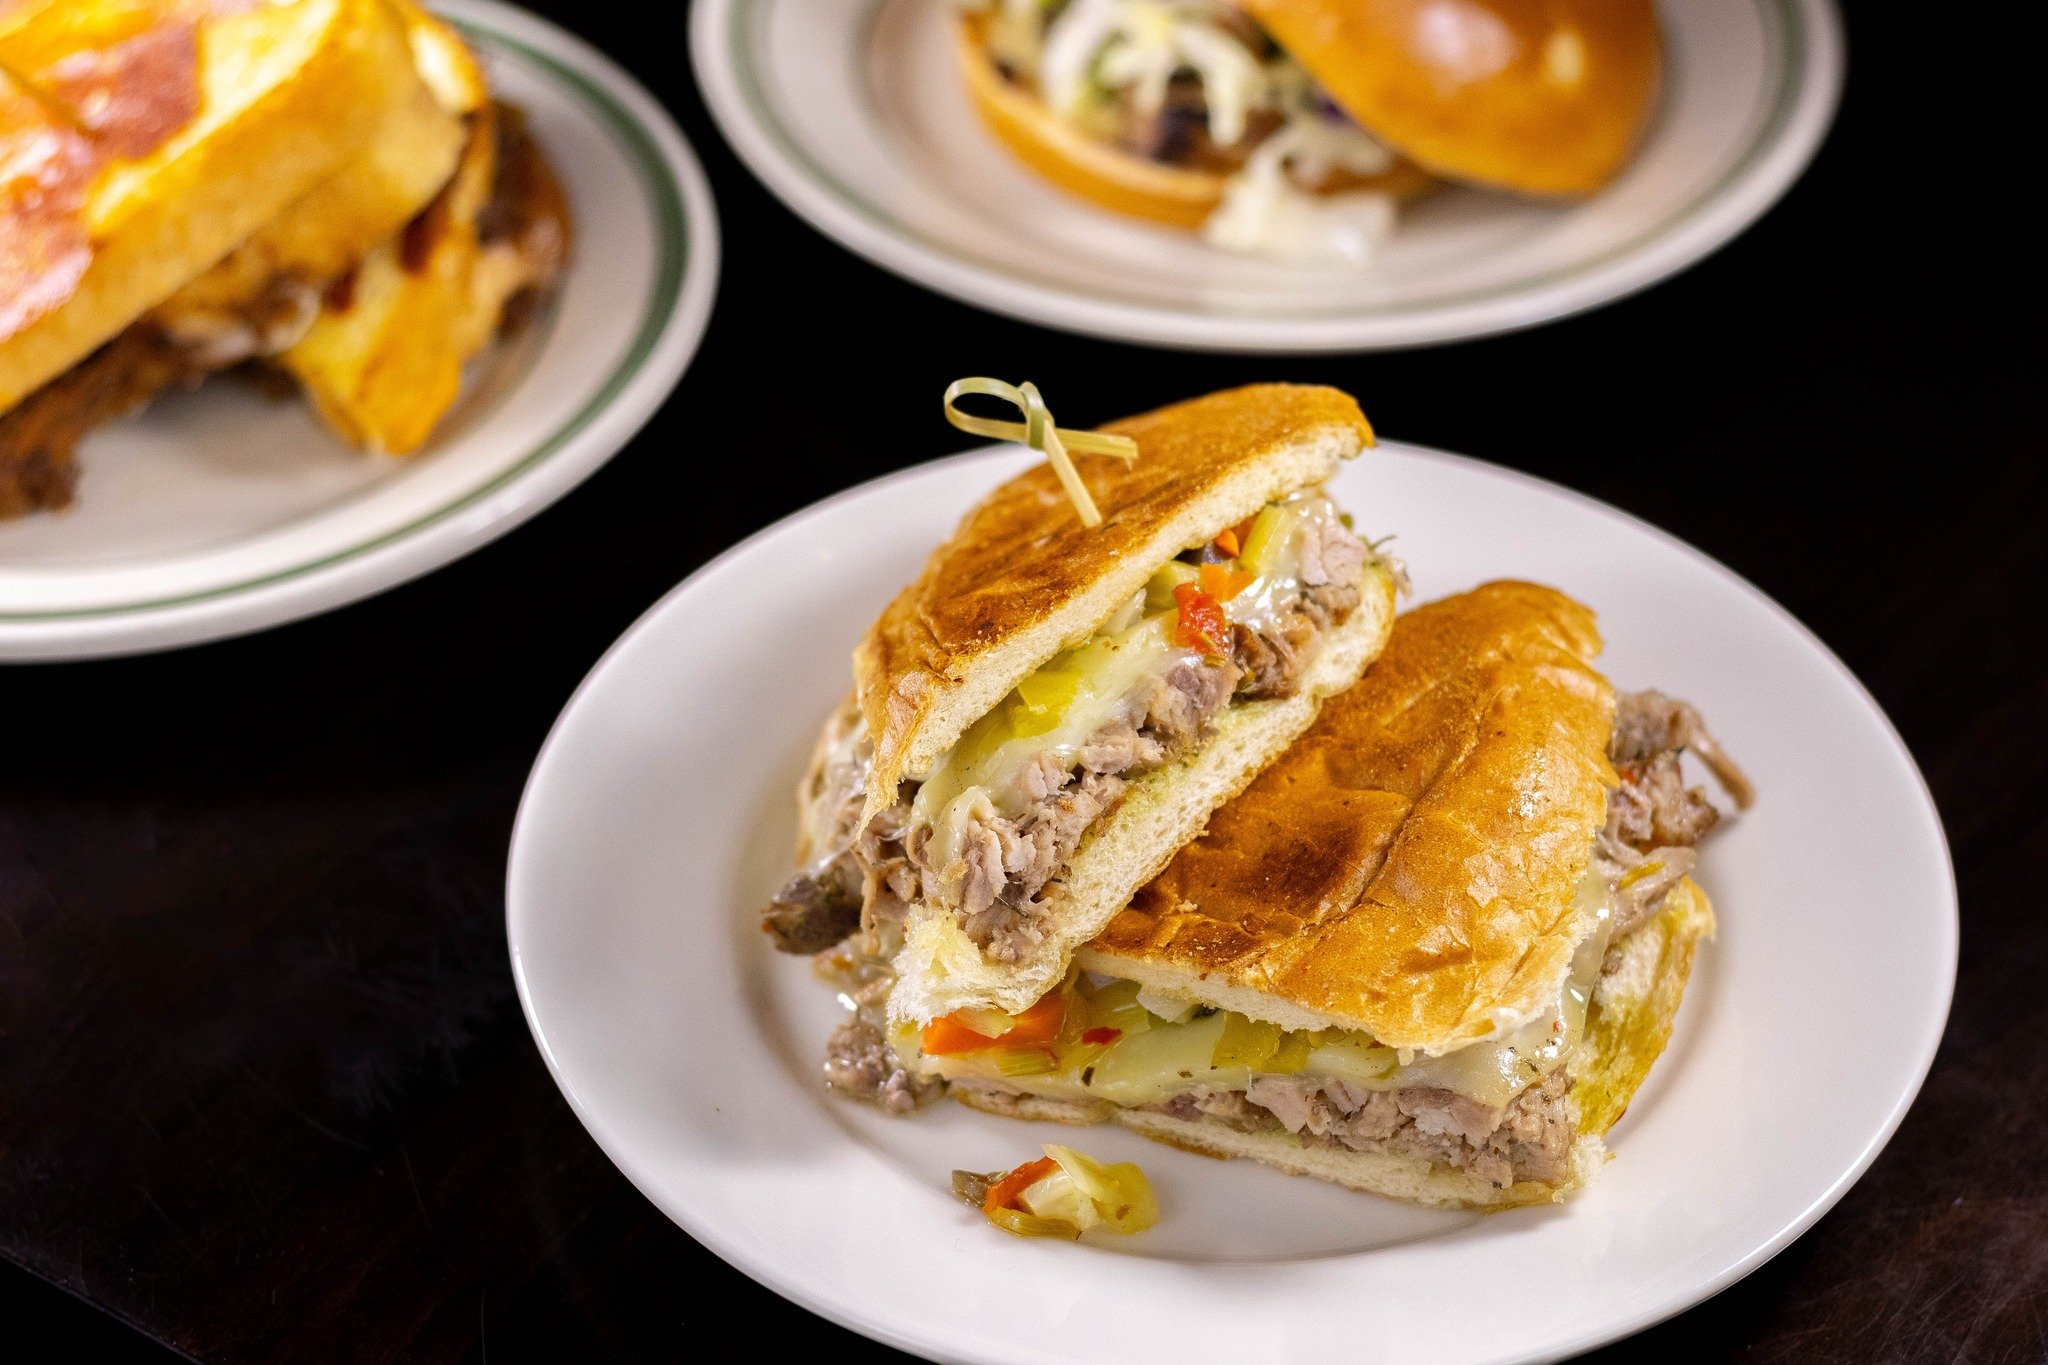 Our new porketta sandwich is filled with slow-roasted pork, pesto mayo, provolone cheese &amp; giardiniera on a hoagie bun that is pressed panini-style. Served with your choice of a side! 🥪